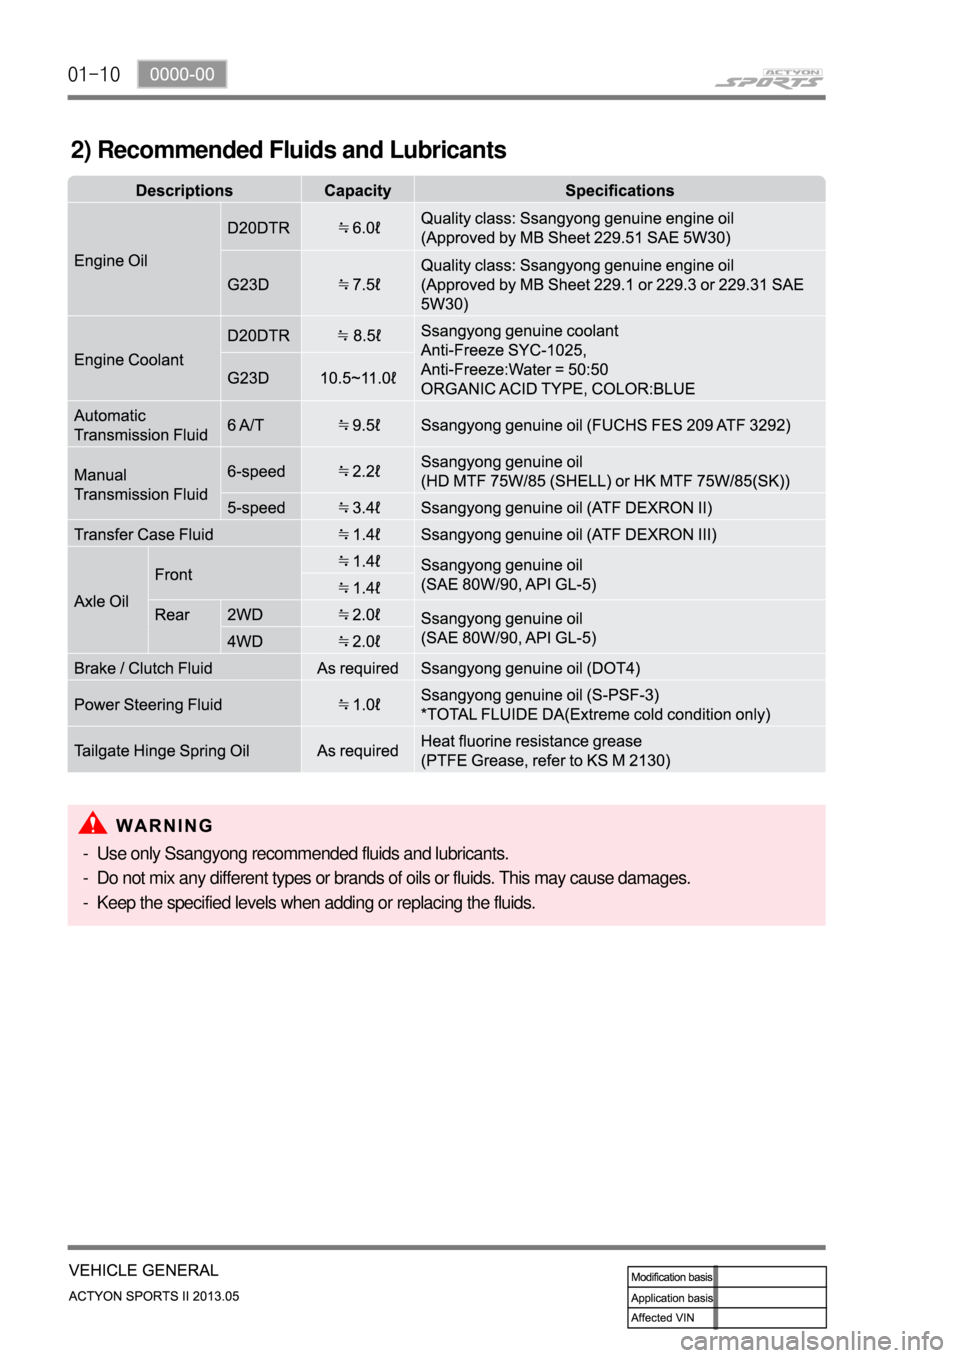 SSANGYONG NEW ACTYON SPORTS 2013  Service Manual 01-10
2) Recommended Fluids and Lubricants
Use only Ssangyong recommended fluids and lubricants.
Do not mix any different types or brands of oils or fluids. This may cause damages.
Keep the specified 